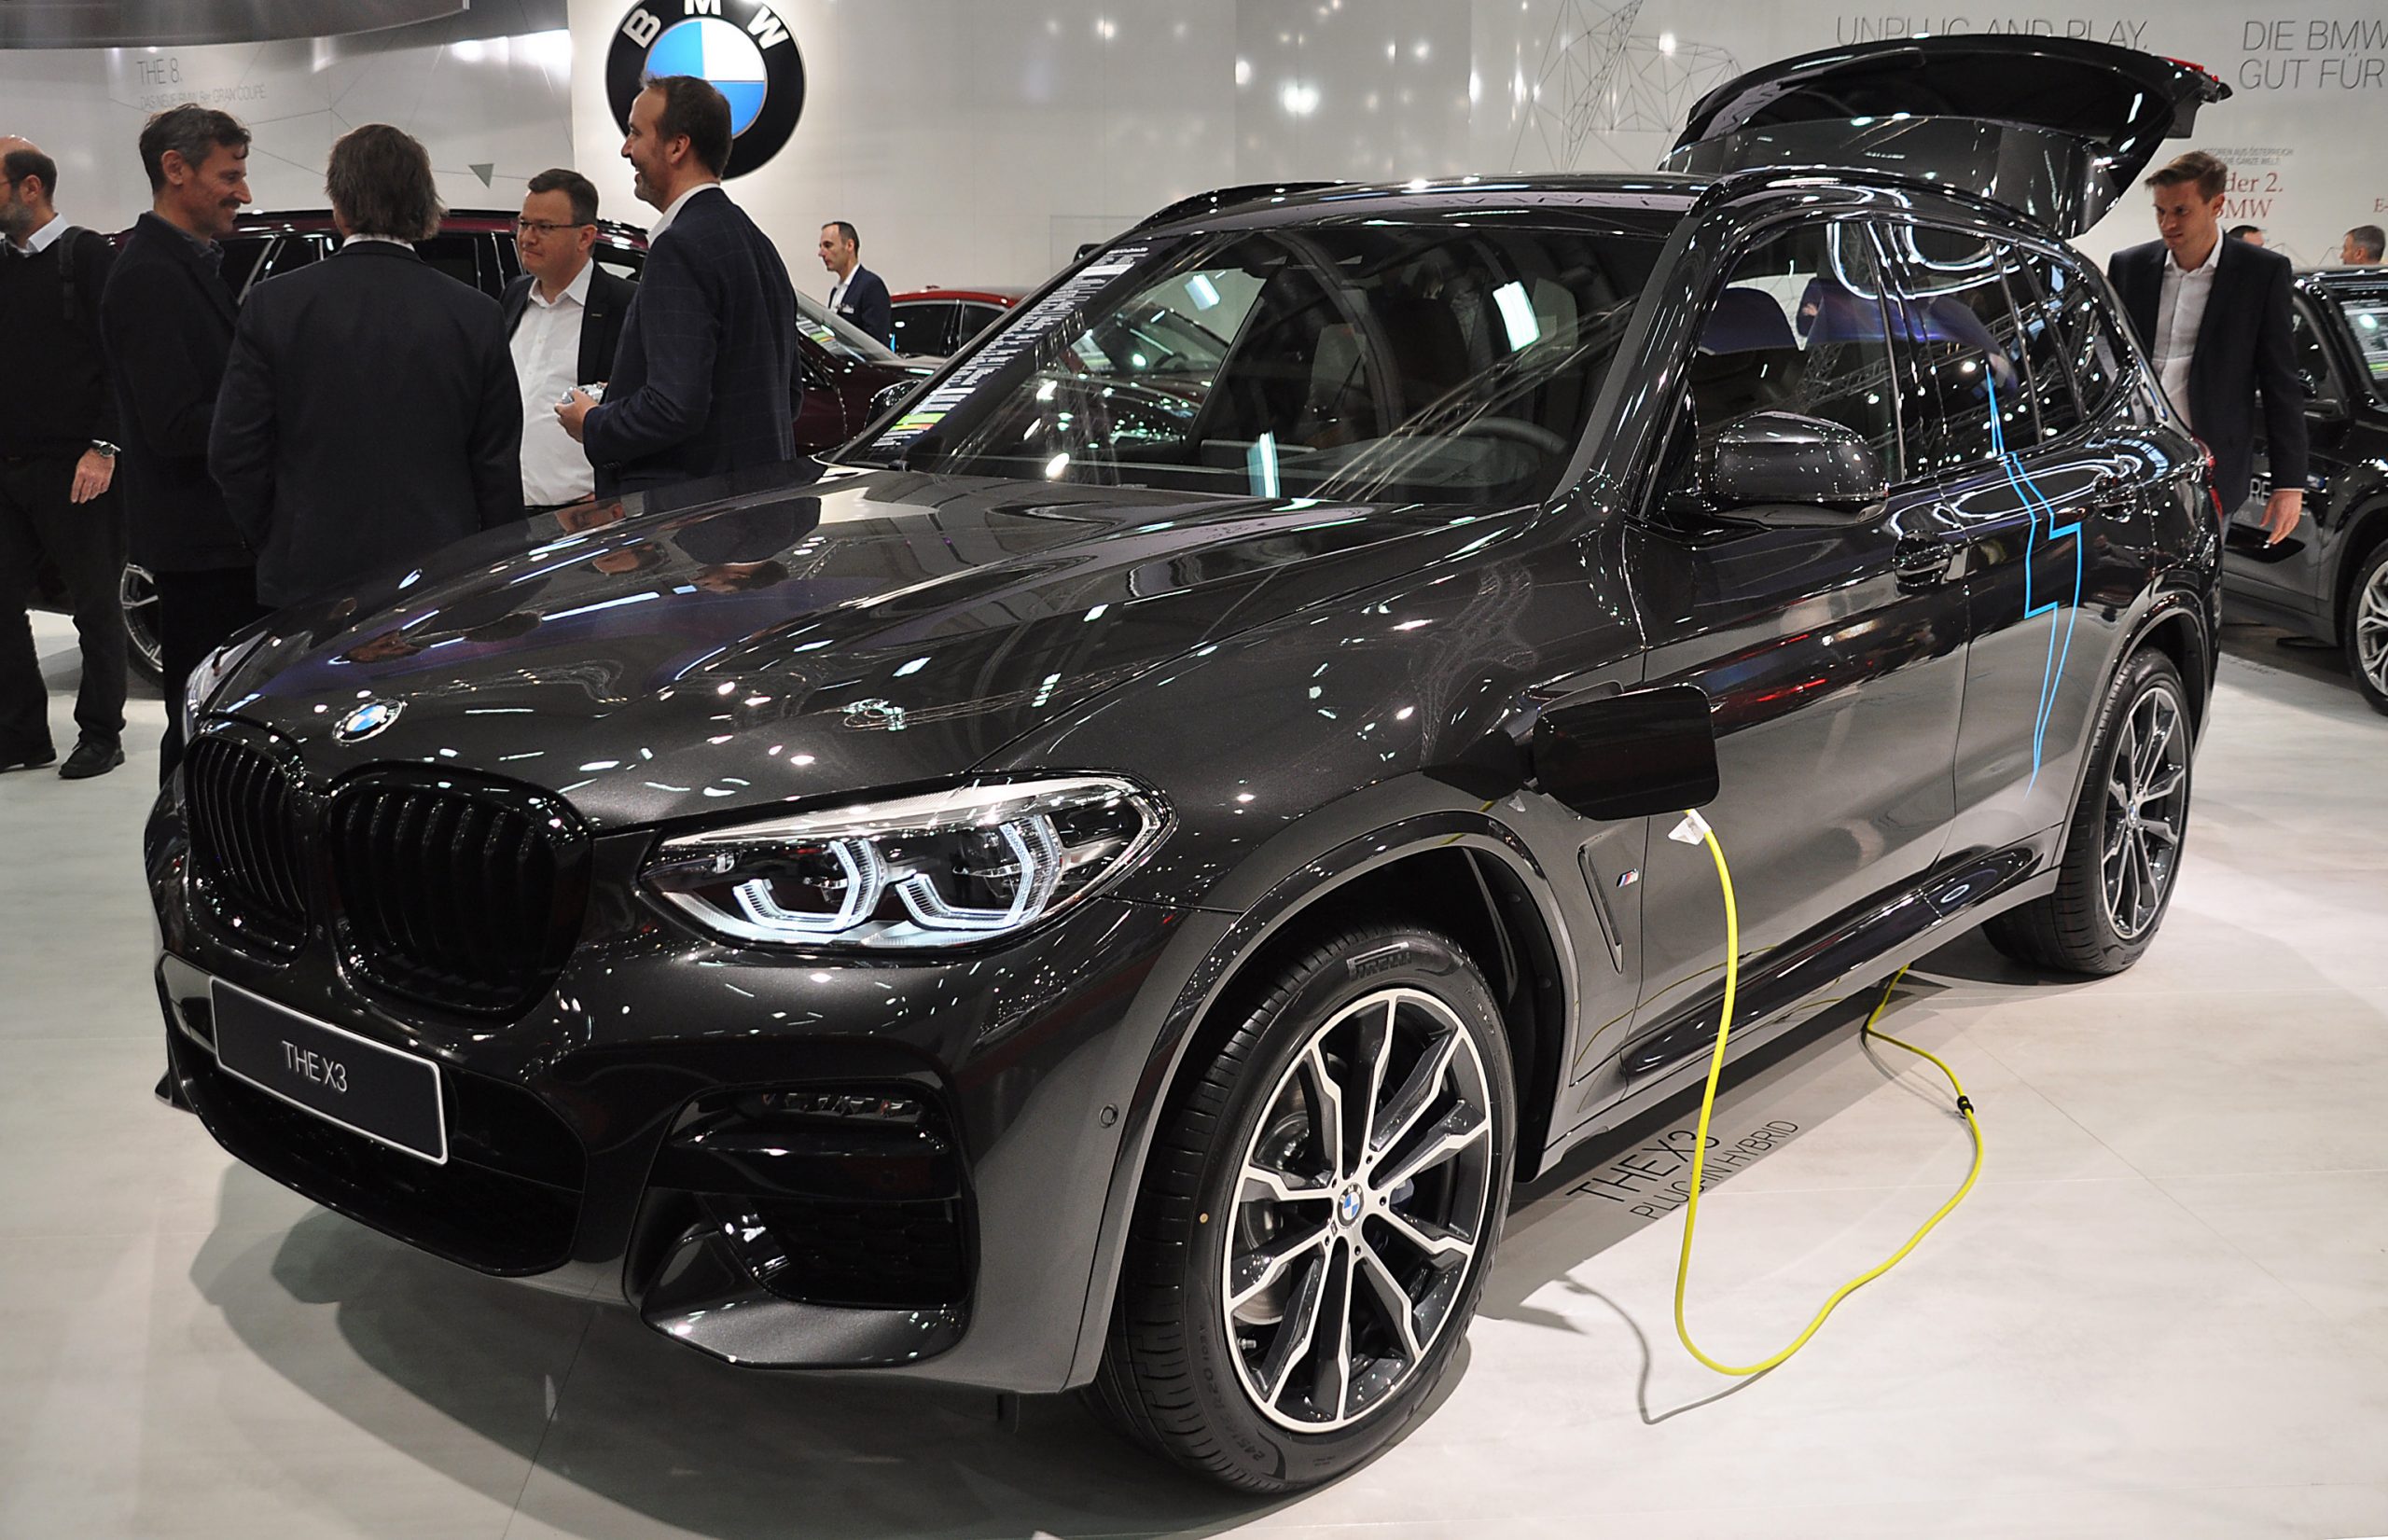 A BMW X3 is seen during the Vienna Car Show press preview at Messe Wien